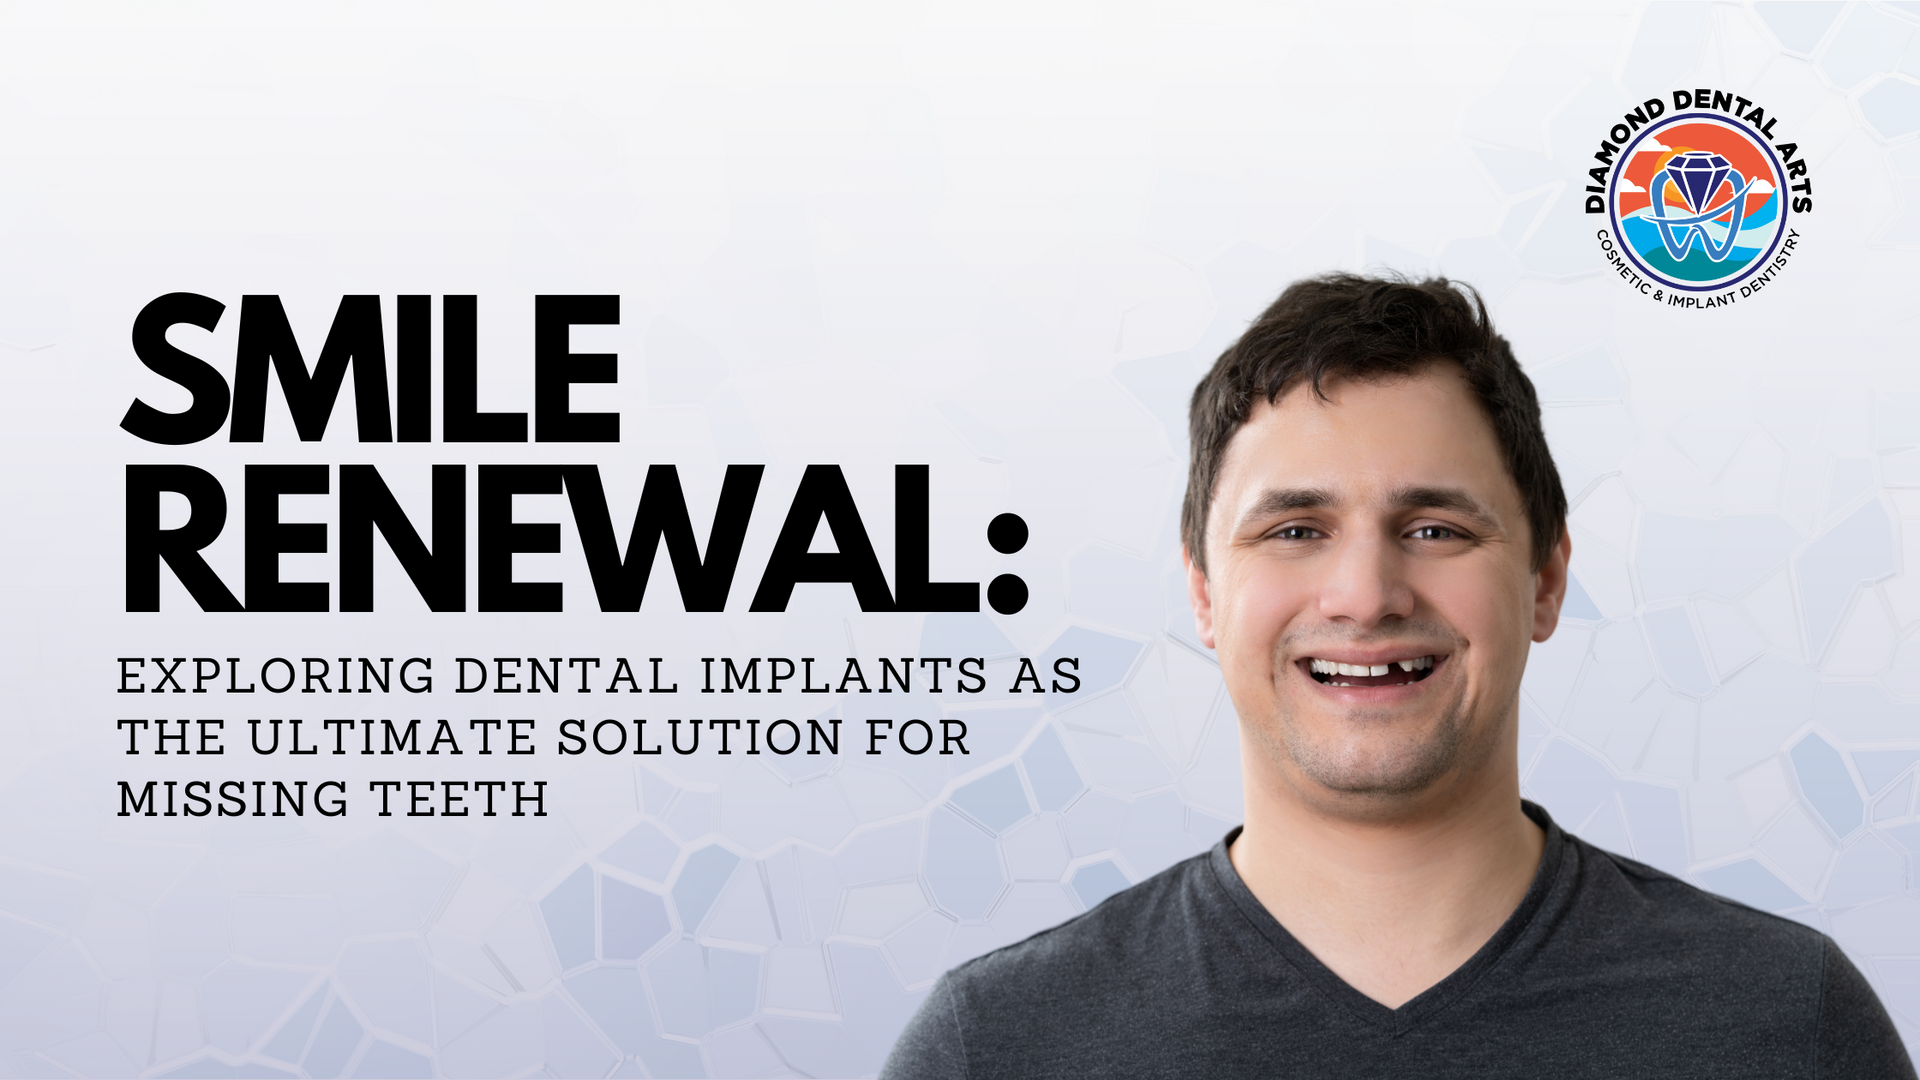 Man with missing tooth and title Smile Renewal: Exploring Dental Implants as the Ultimate Solution